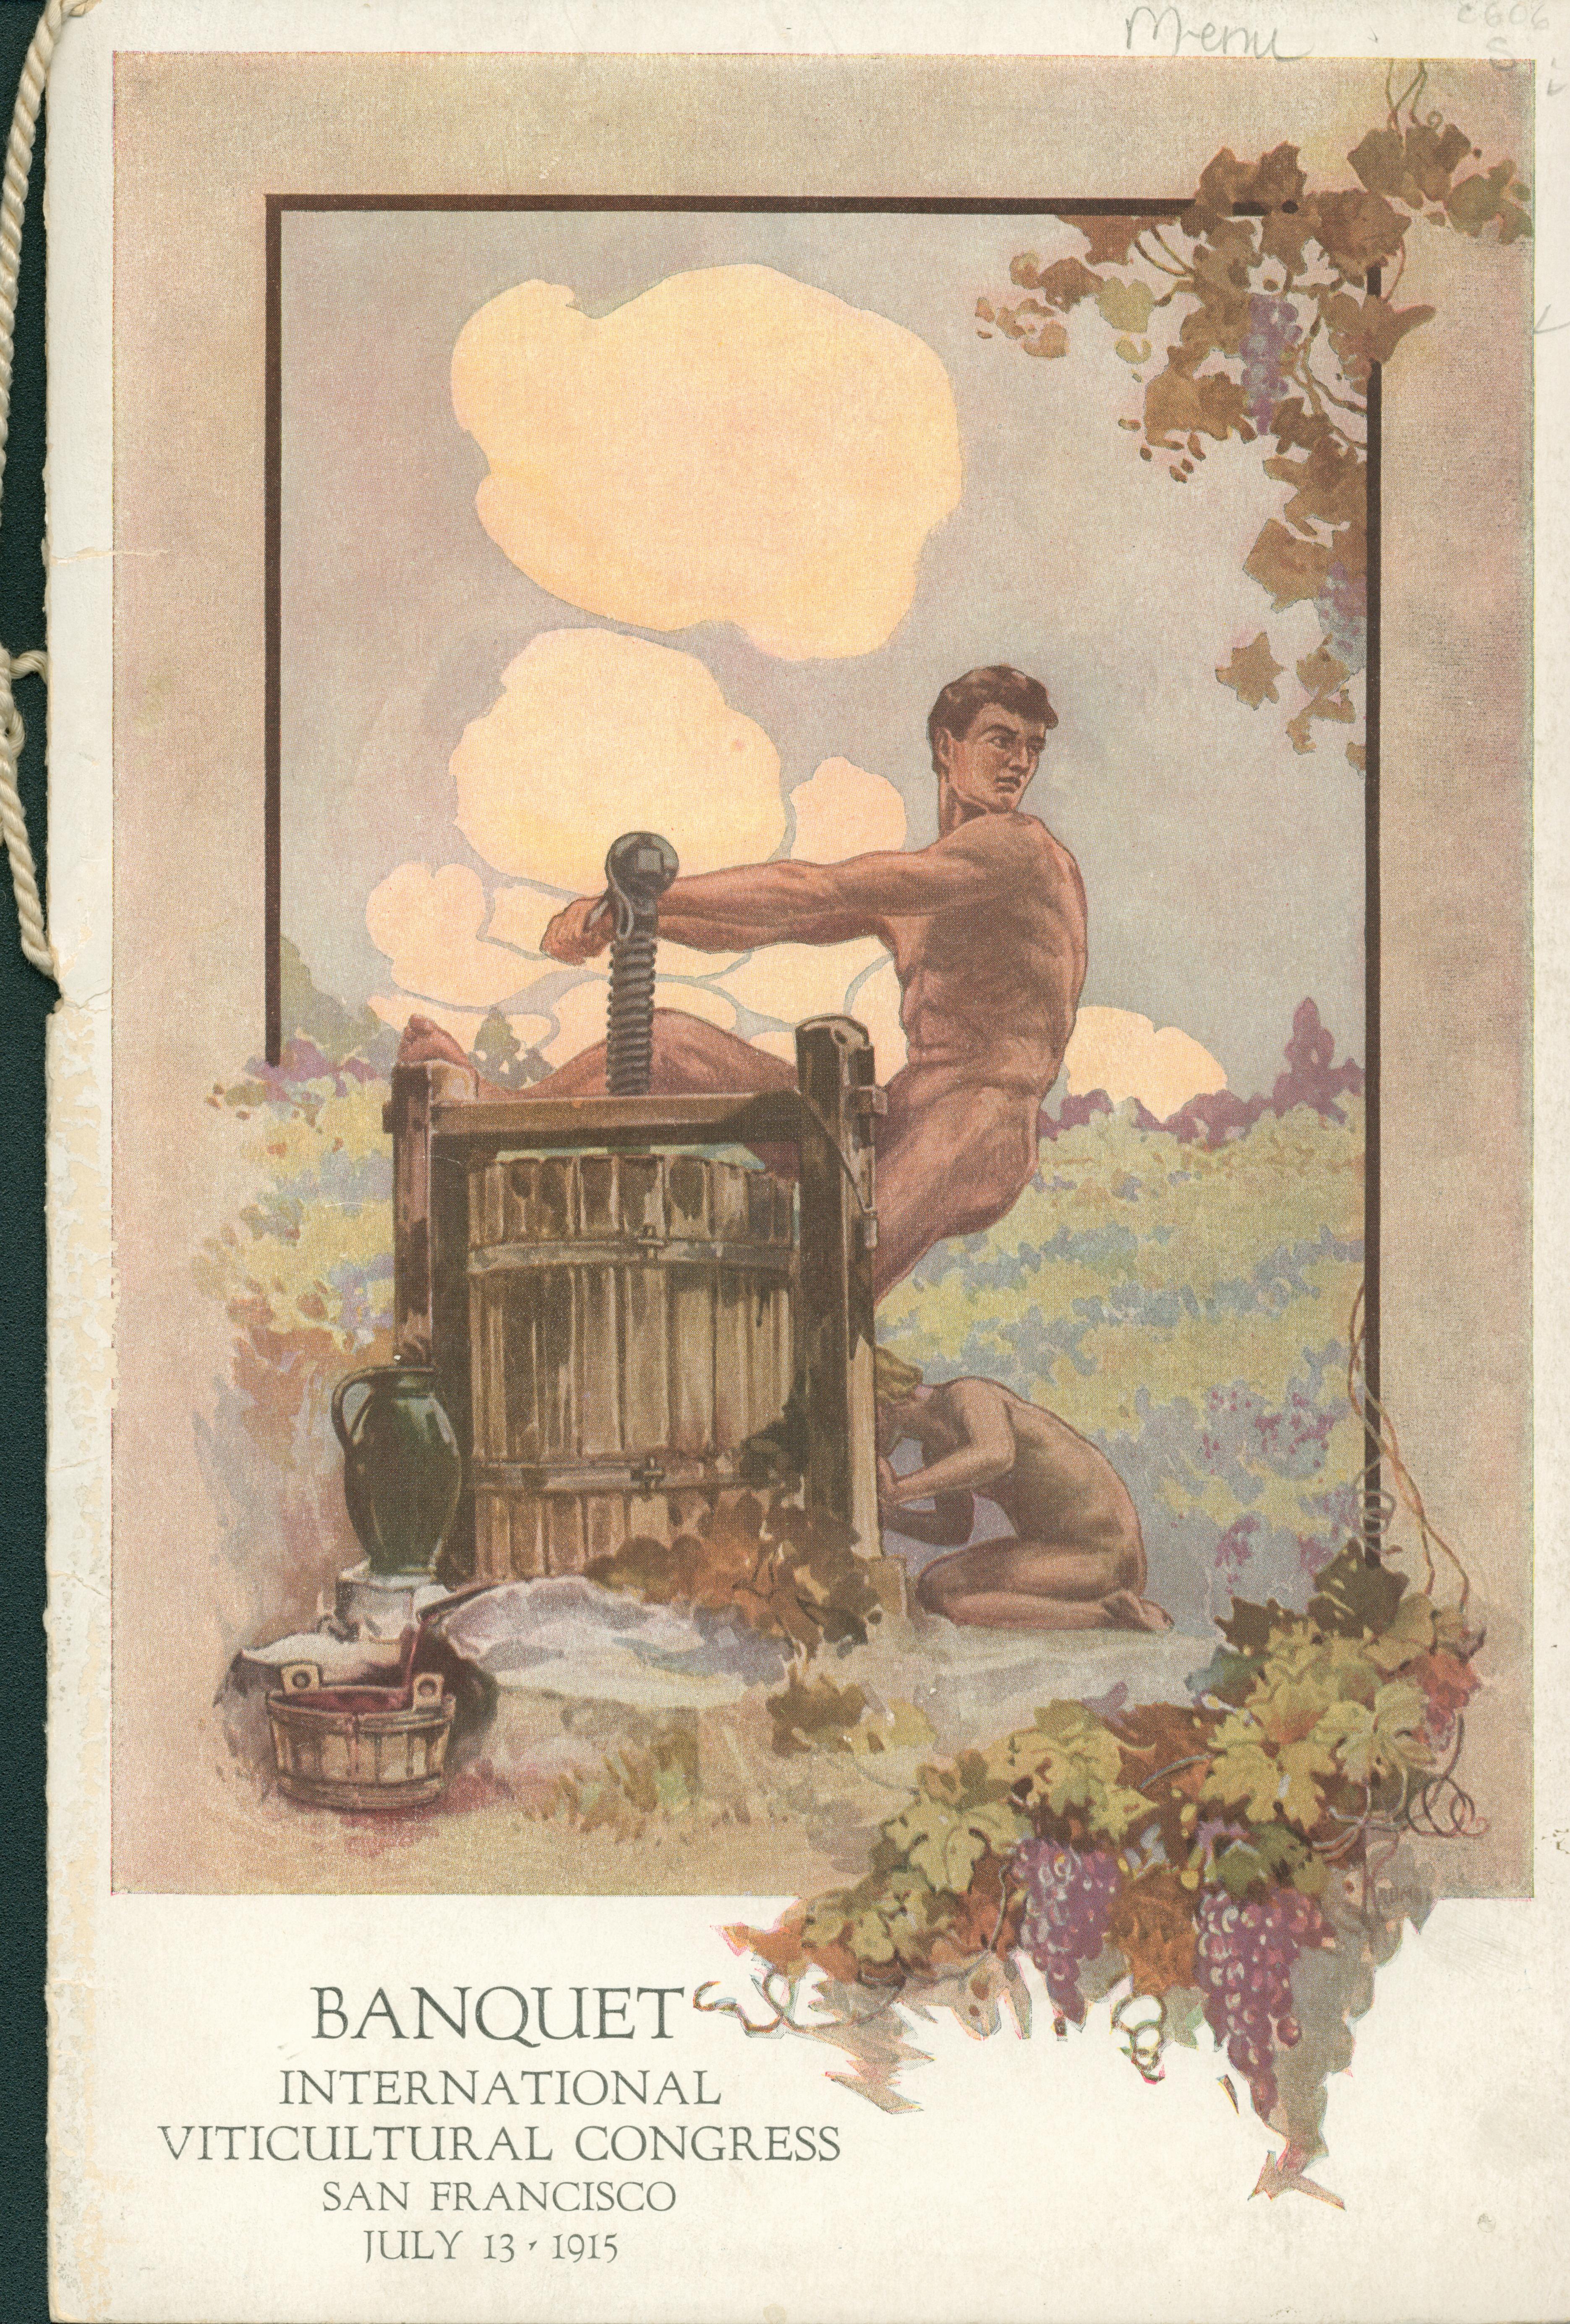 The front cover shows a nude in a bucolic setting cranking a wine press.